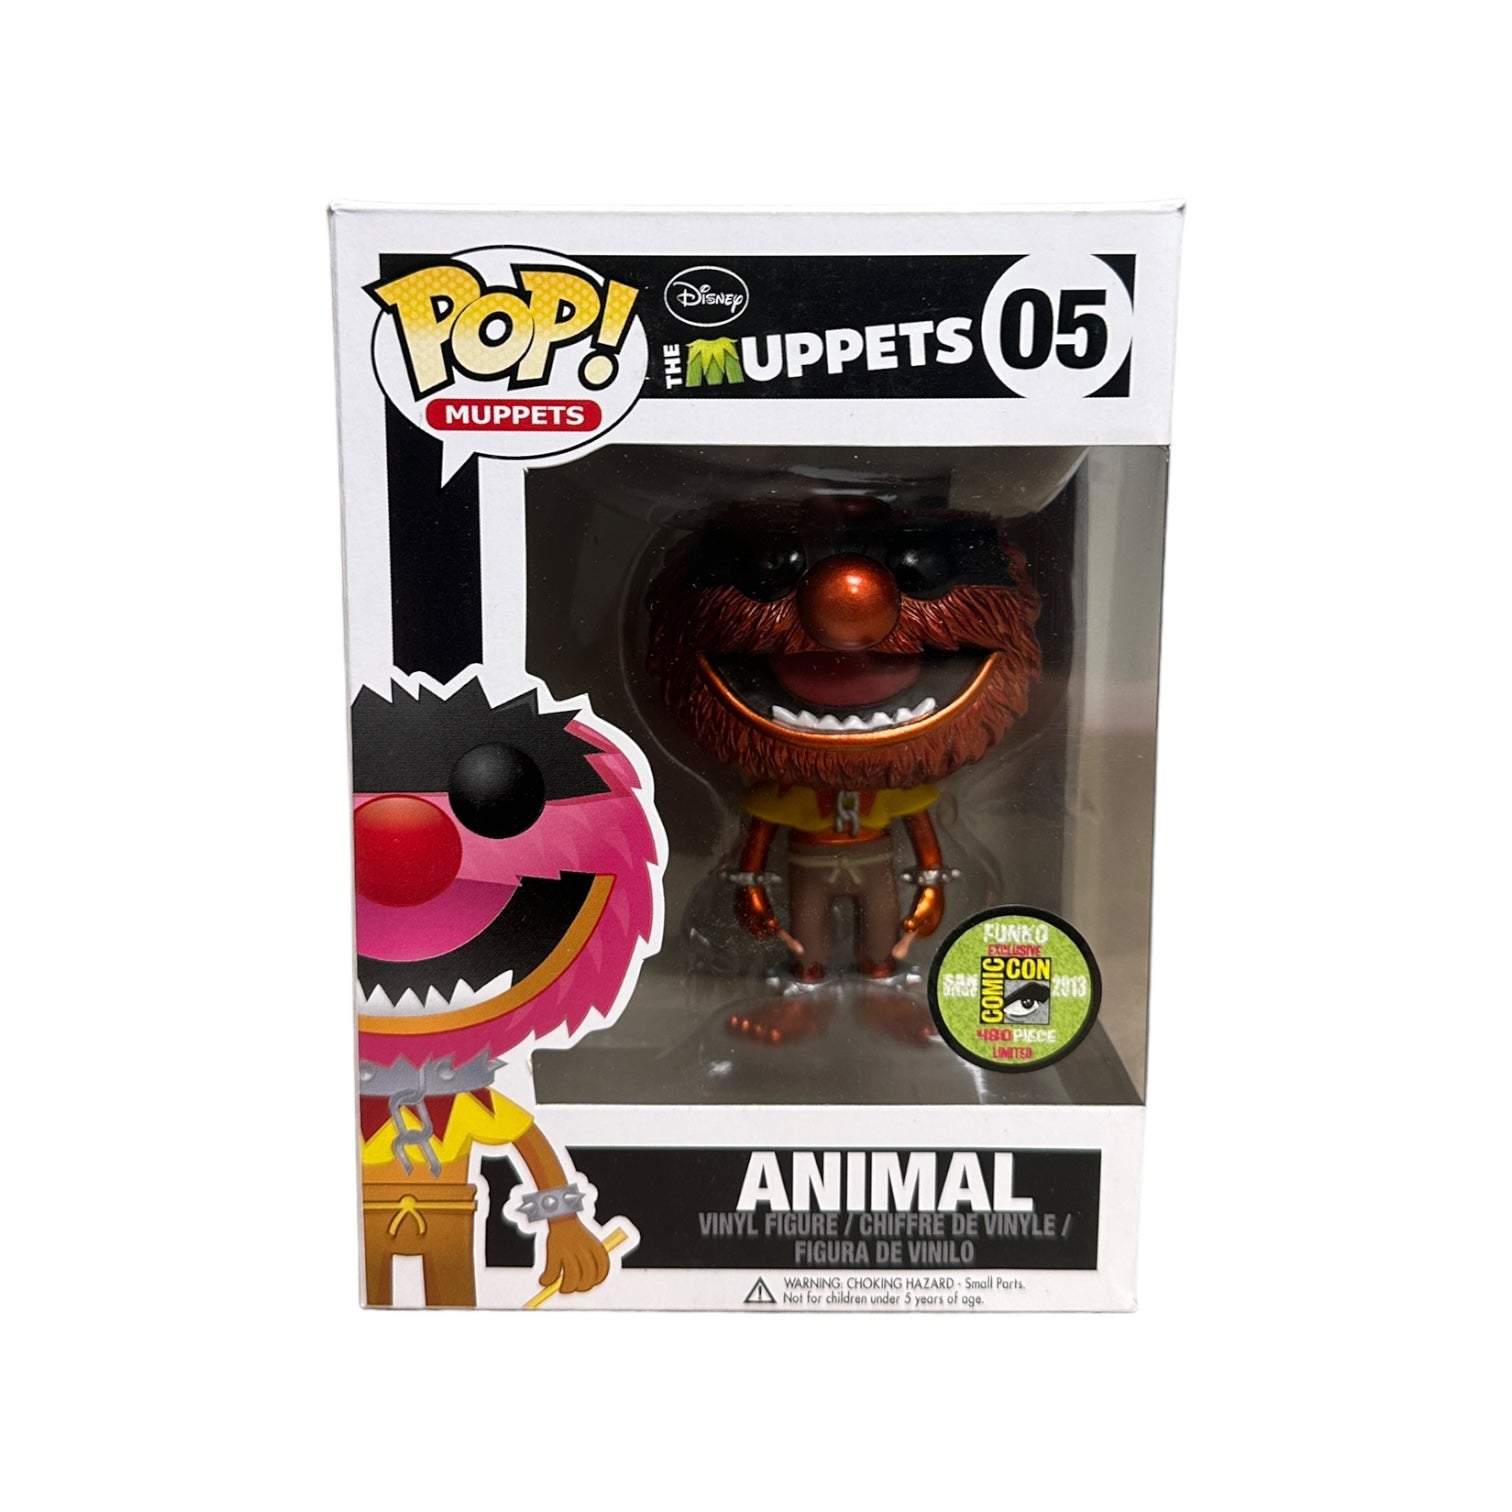 Animal #05 (Metallic) Funko Pop! - The Muppets - SDCC 2013 Exclusive LE480 Pcs - Condition 8.75/10